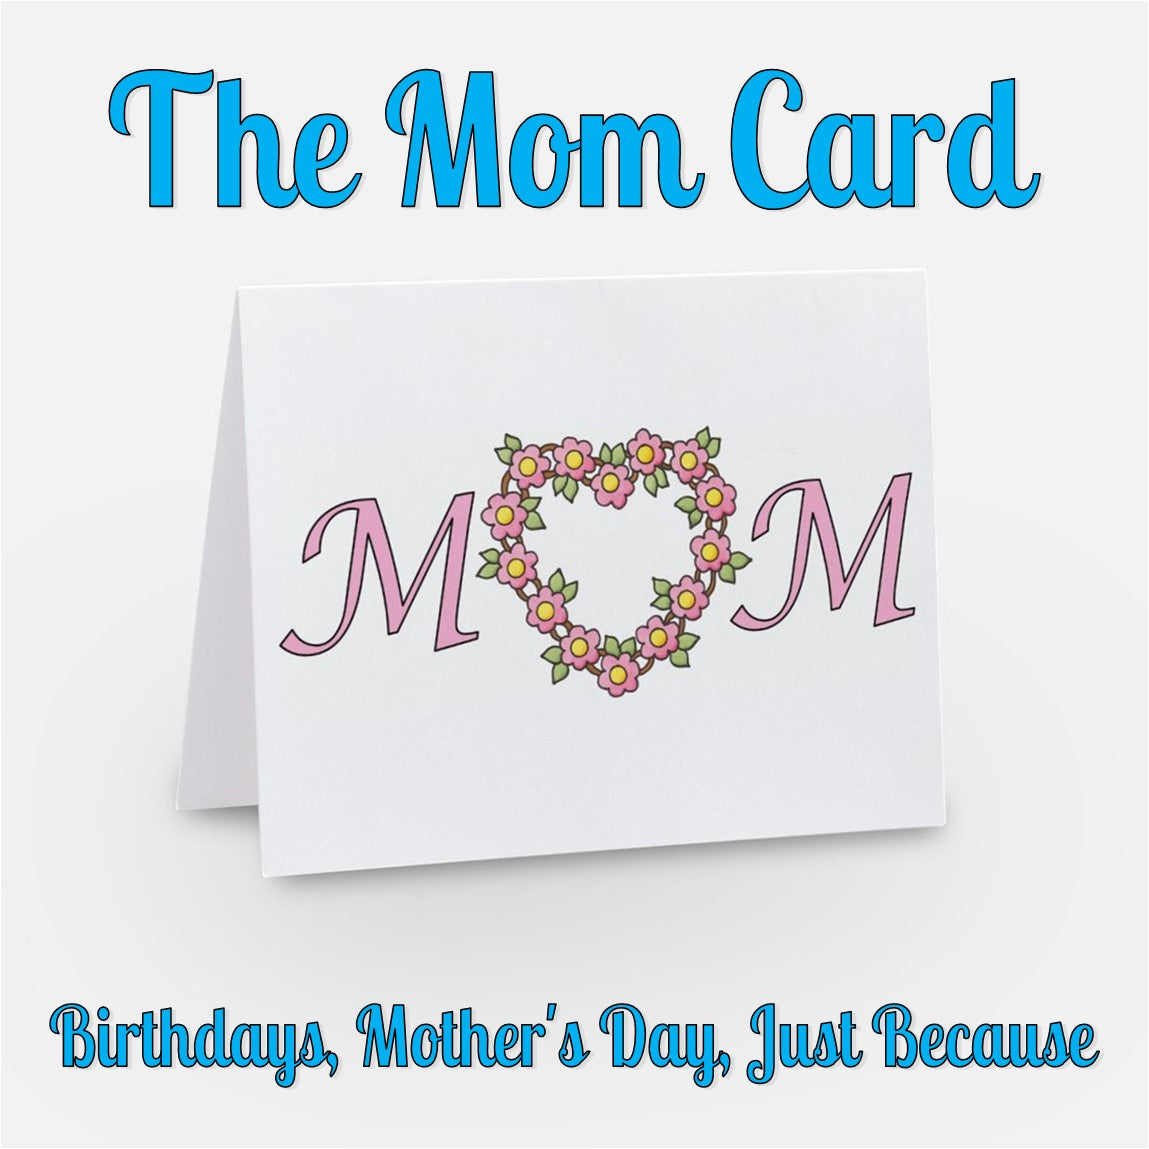 Card - Mom Card - Floral Heart Card for Mom for Mother's Day or Birthday (Stationery & More) (Literacy Project) (Snail Mai)l